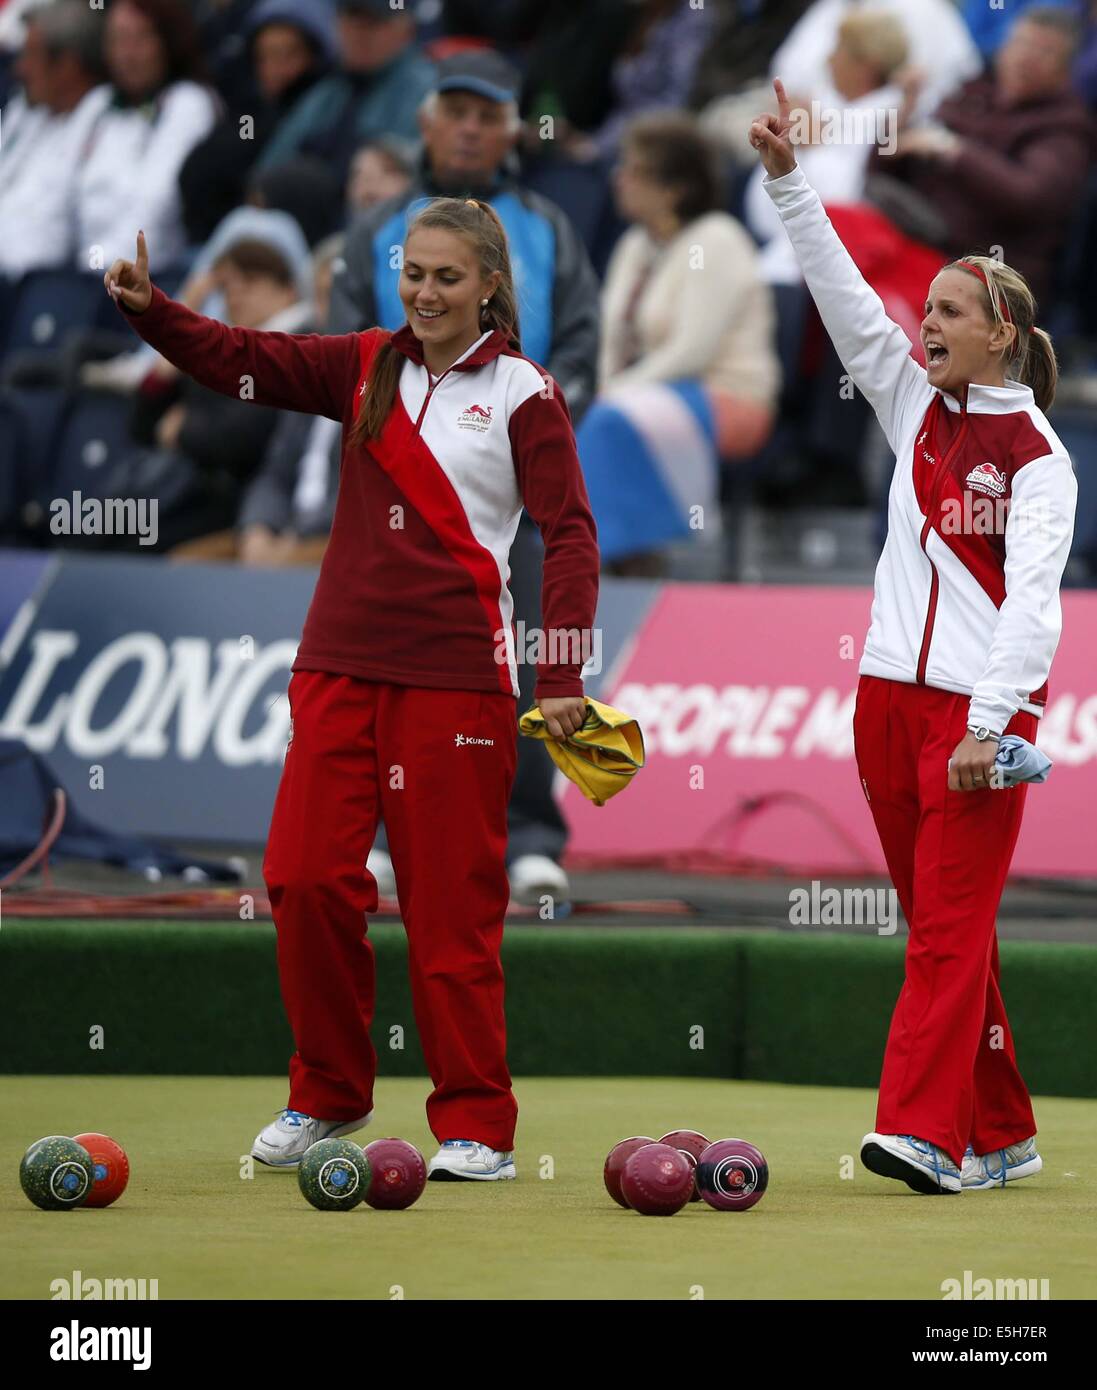 Glasgow, Scotland. 31st July, 2014. Ellen Falkner (R) of England celebrates with her teammate Sophie Tolchard during the women's triples gold medal match of Lawn Bowls between England and Australia on day 8 of the Glasgow 2014 Commonwealth Games at Kelvingrove Lawn Bowls Centre in Glasgow, Scotland, on July 31, 2014. England claimed the title with 22-4. Credit:  Wang Lili/Xinhua/Alamy Live News Stock Photo